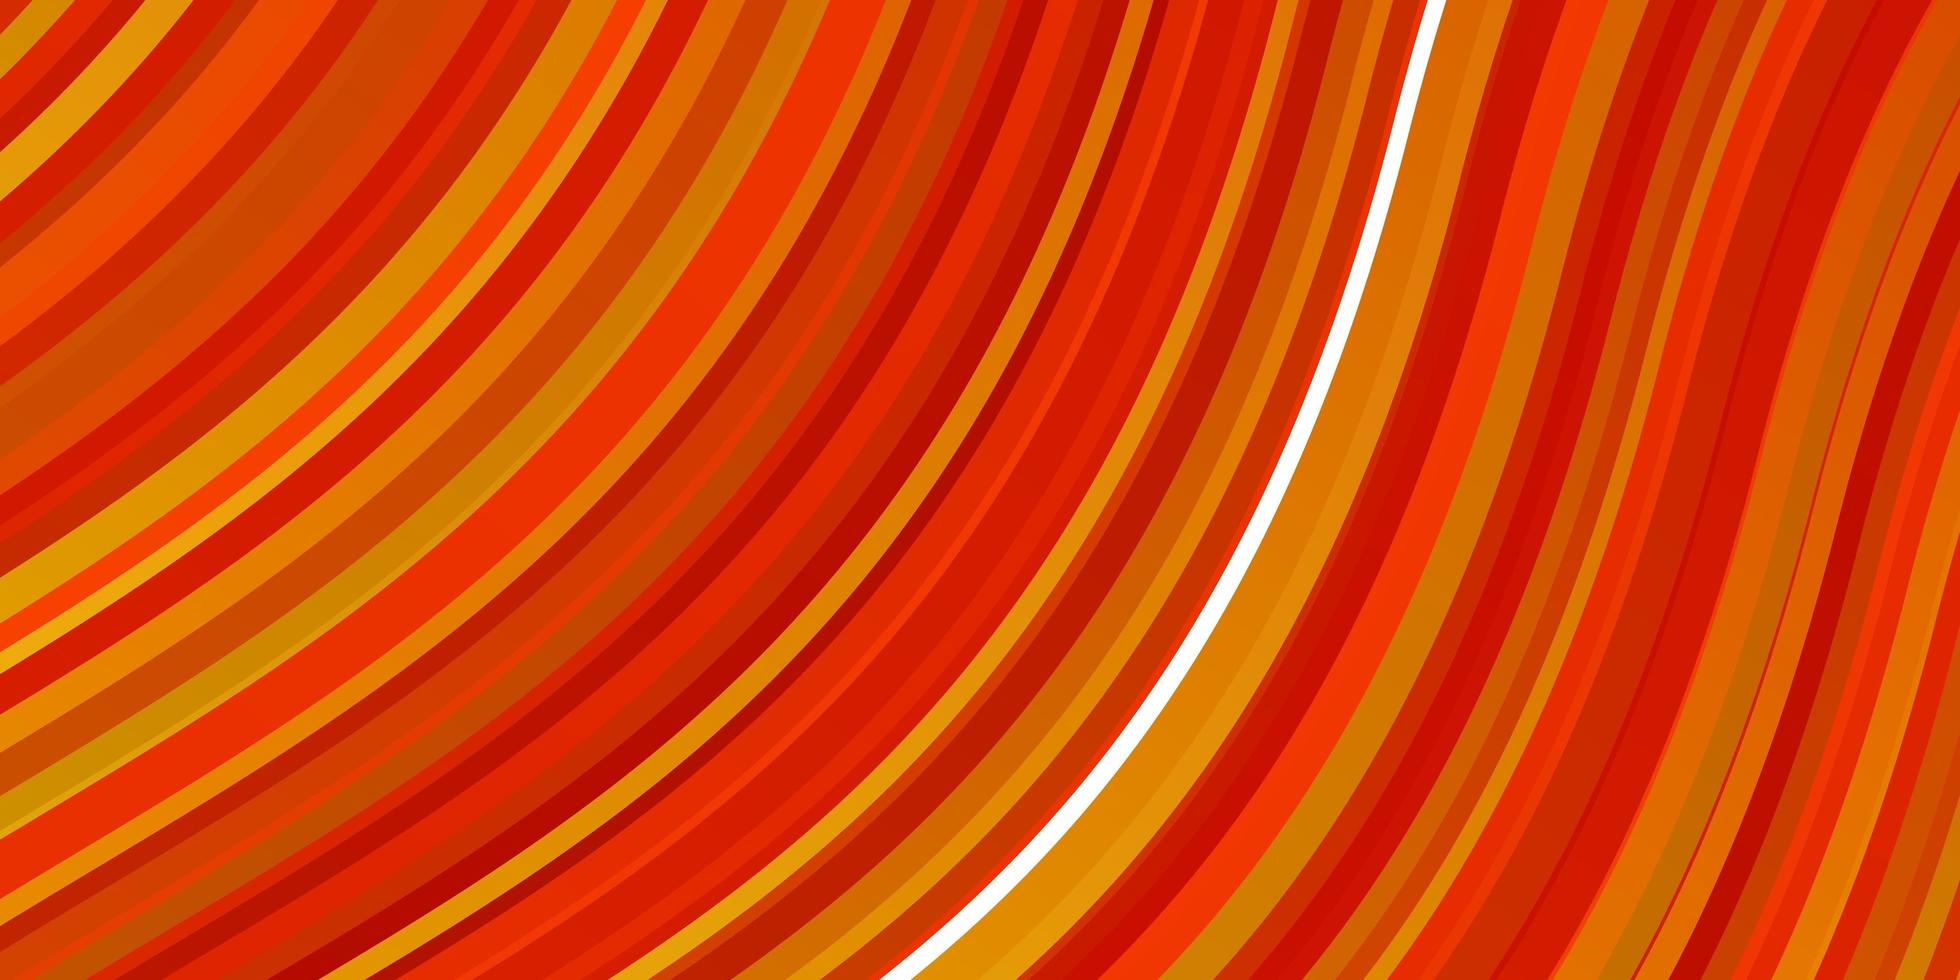 Light Red, Yellow vector pattern with curves.